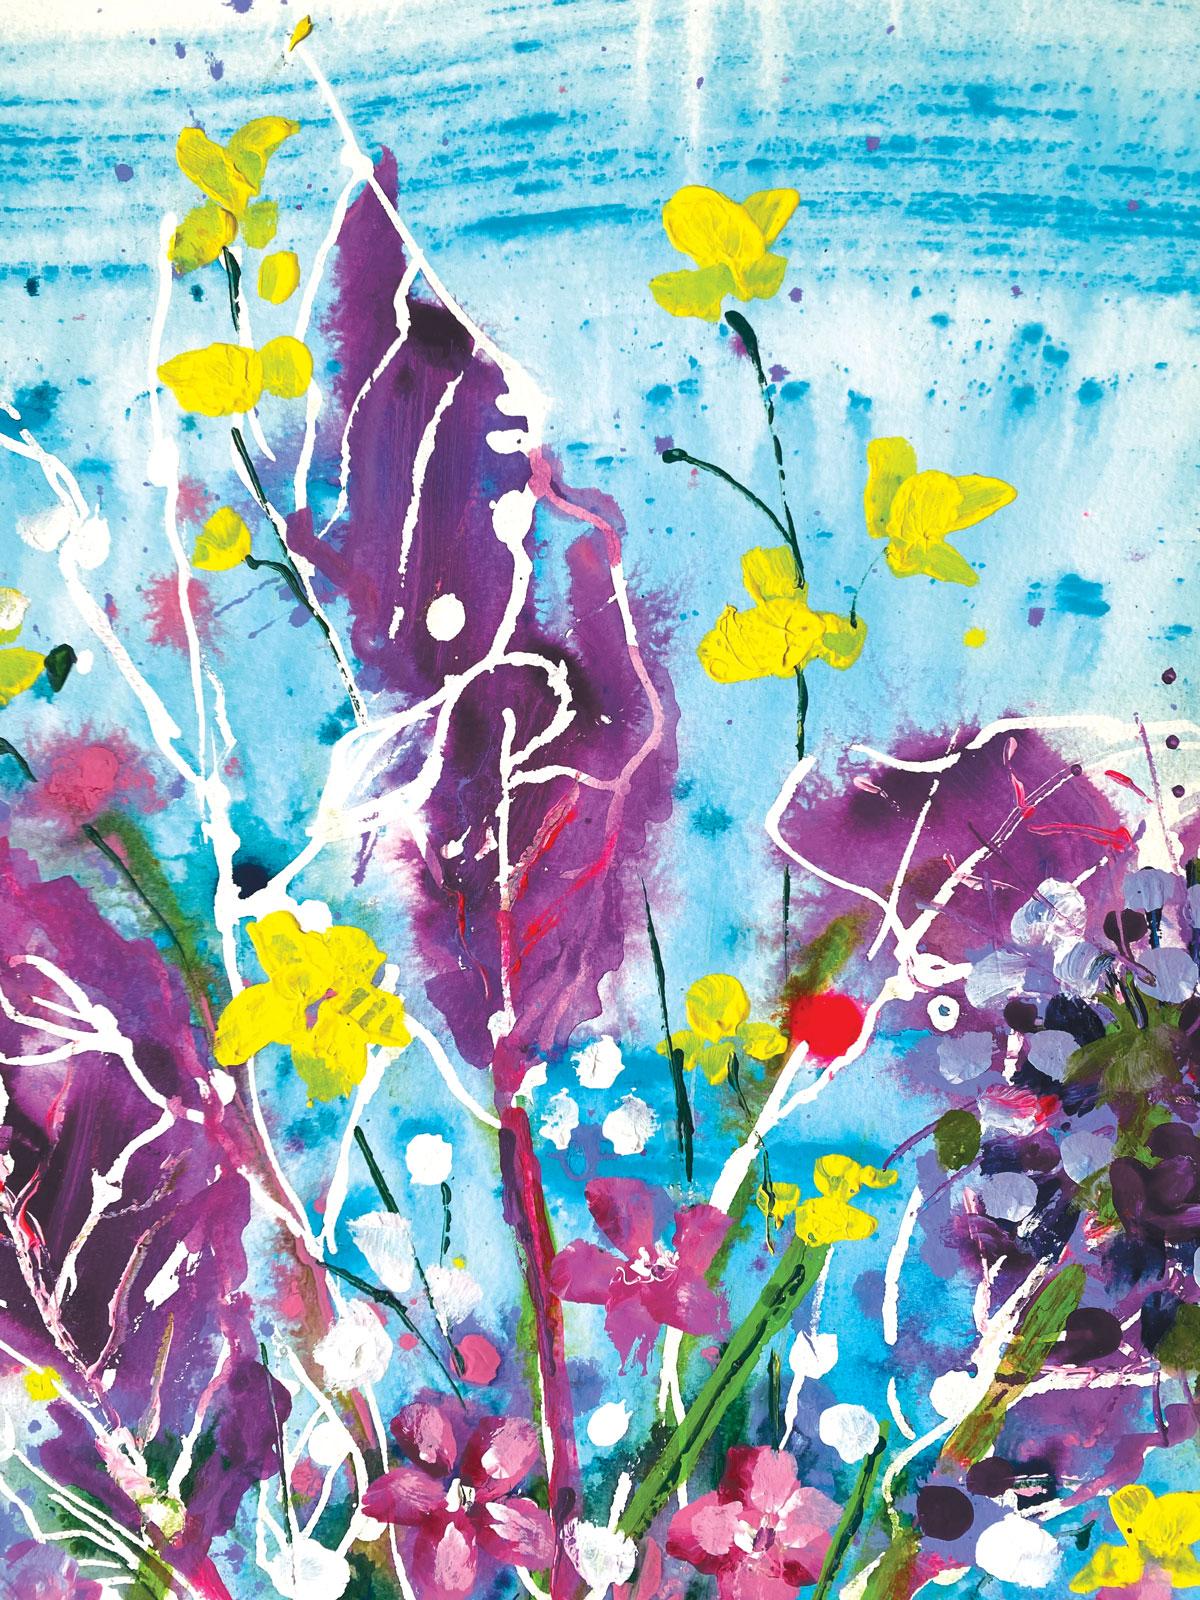 From fields of flowers - Painting by Rachael Dalzell